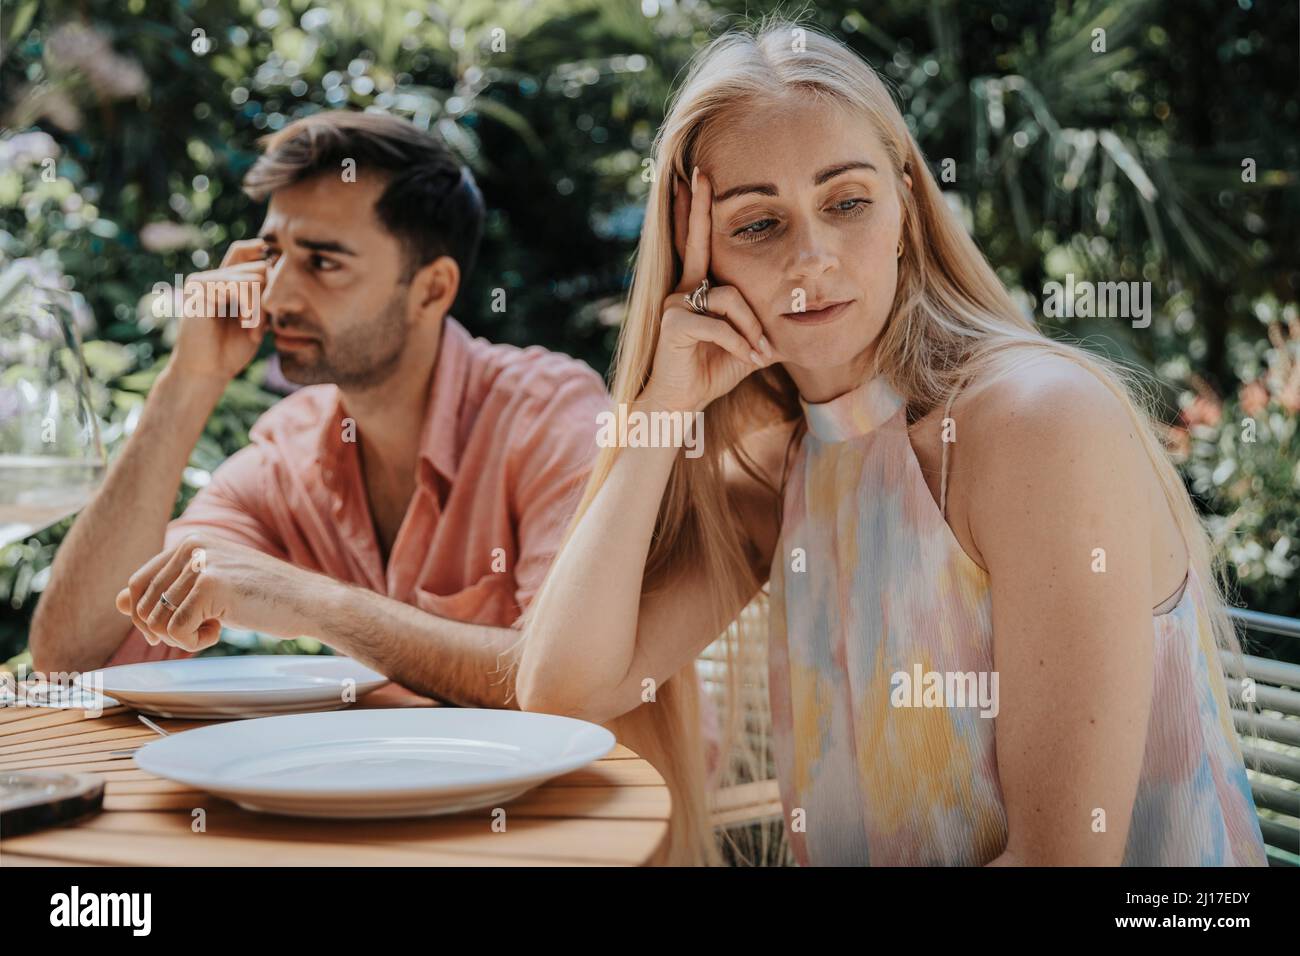 Couple ignoring each other at outdoor table Stock Photo